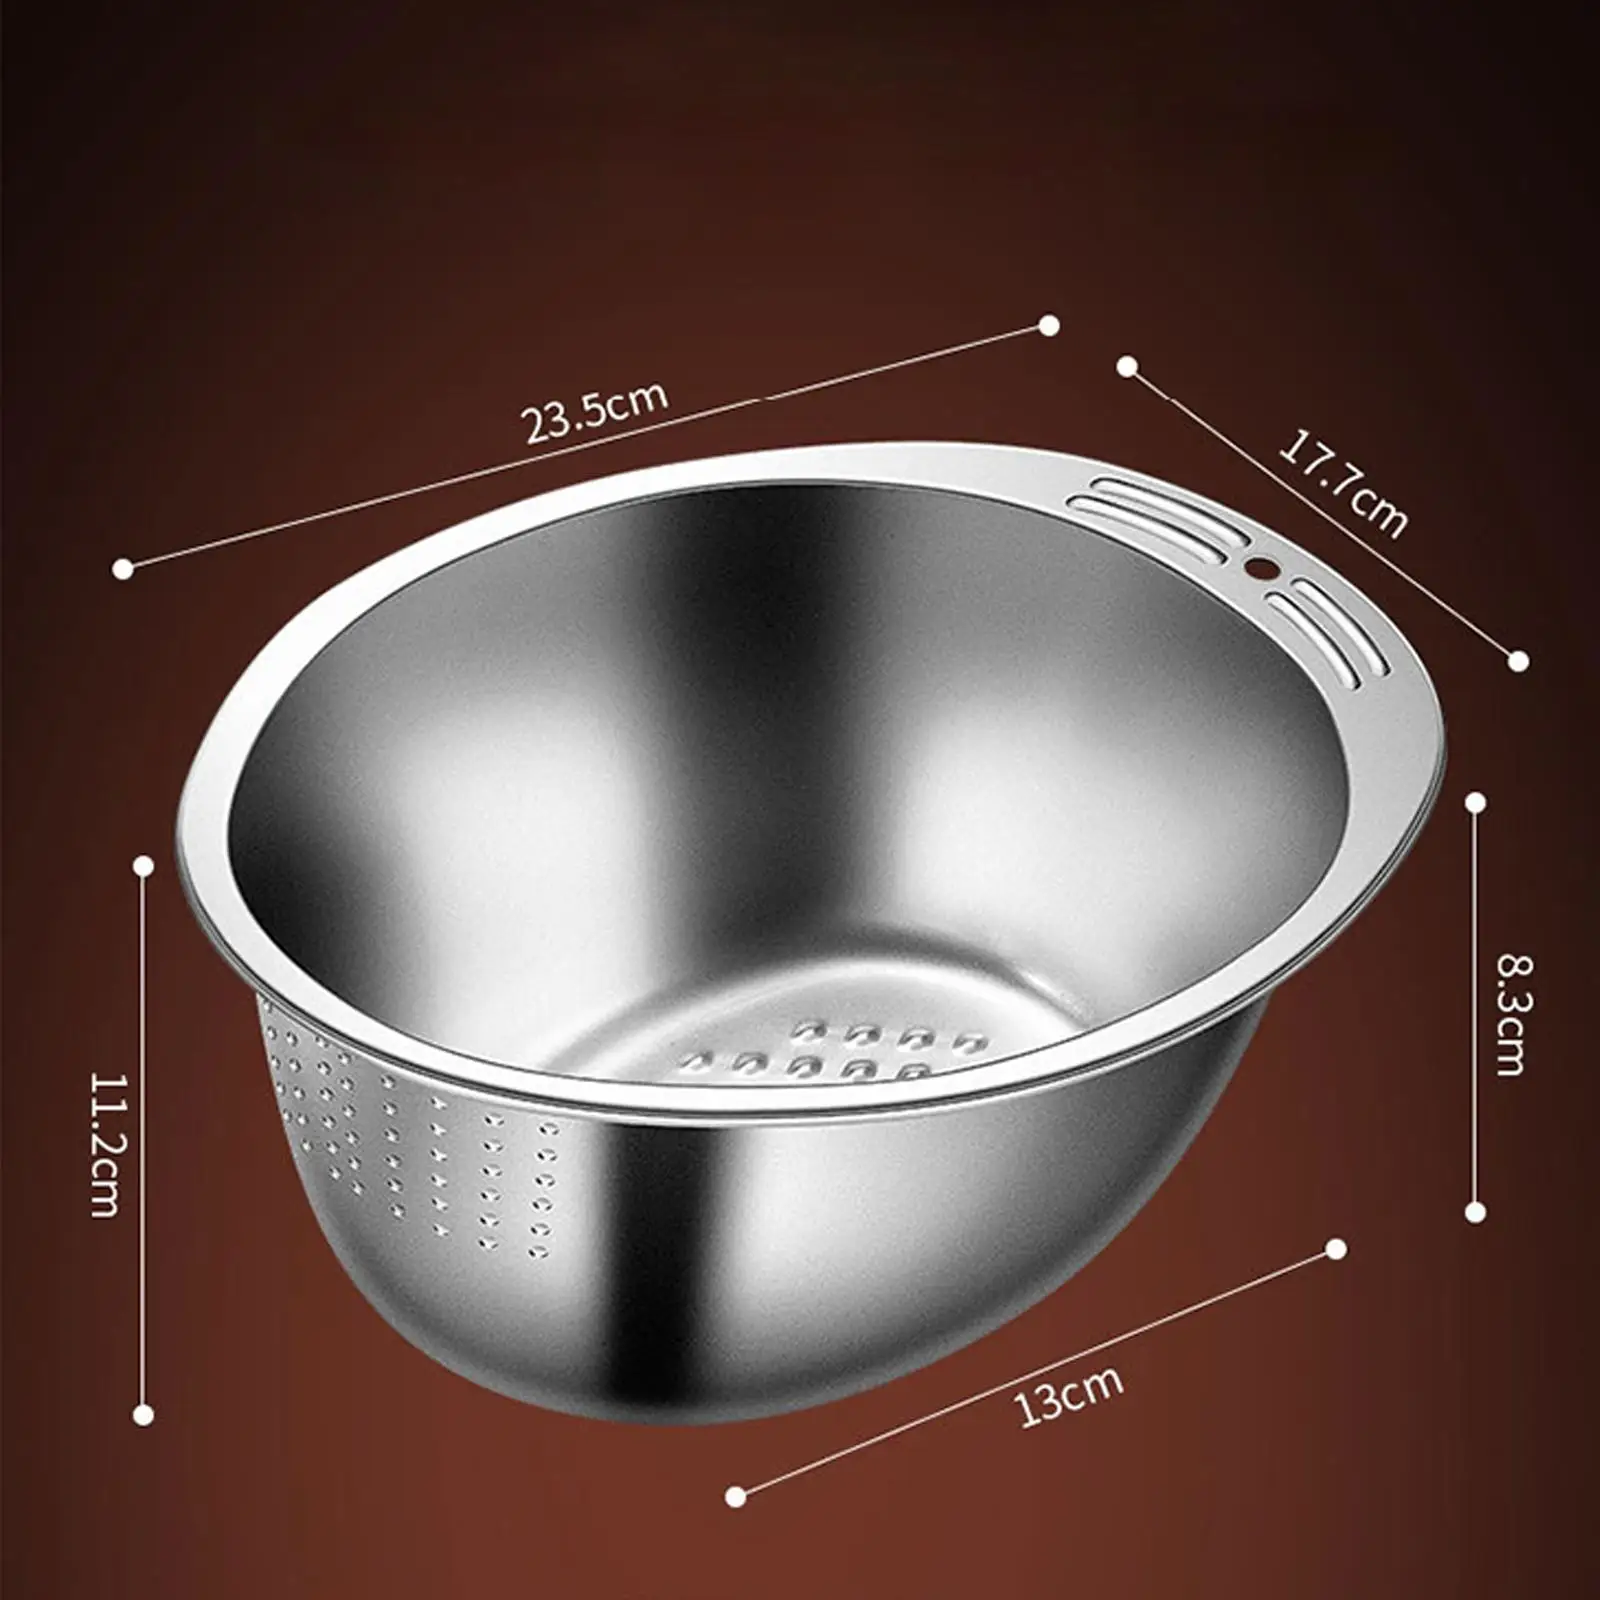 Kitchen Colander Strainer Food Cleaning Strainer Sink Colander Strainer Colander for Fruits Tomatoes Carrots Rice Beans